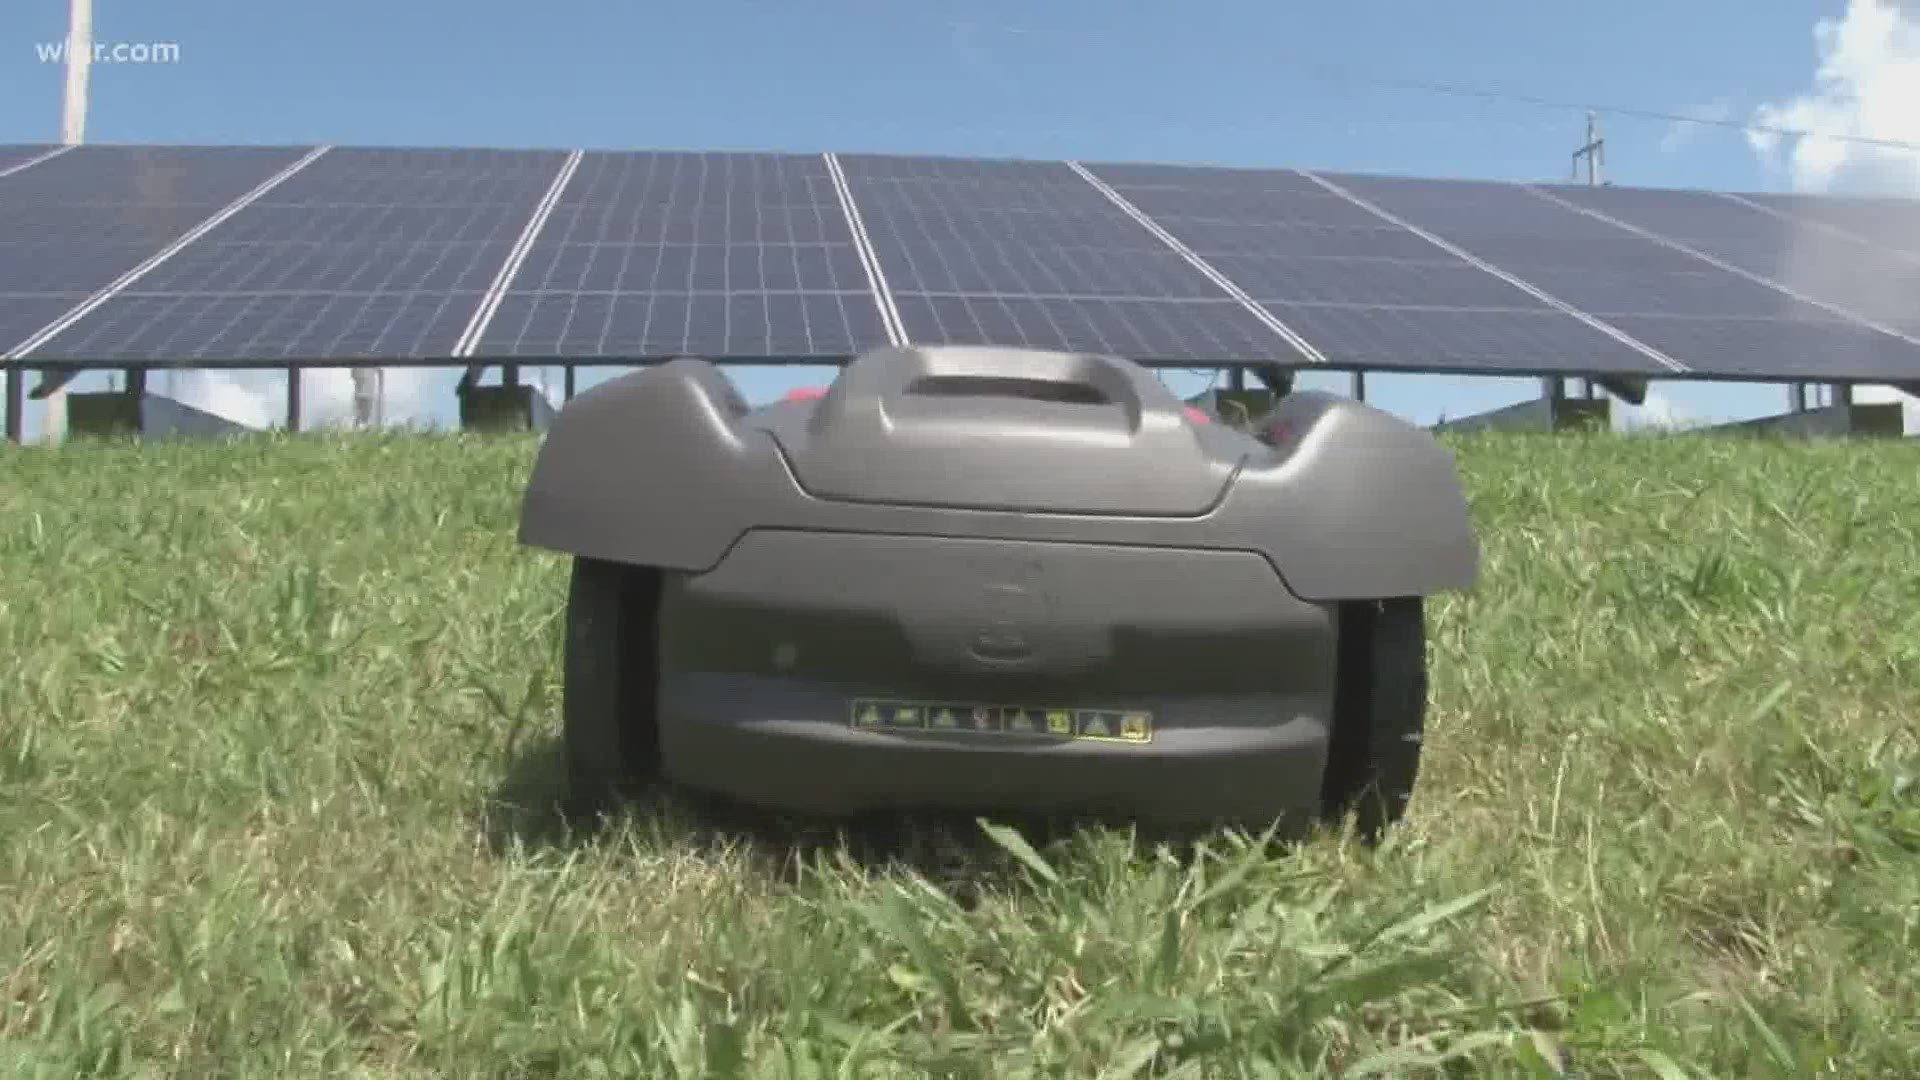 Reporter Katie Inman explains how a small Jefferson County hardware store is the leading force installing these robot lawn mowers of the future.